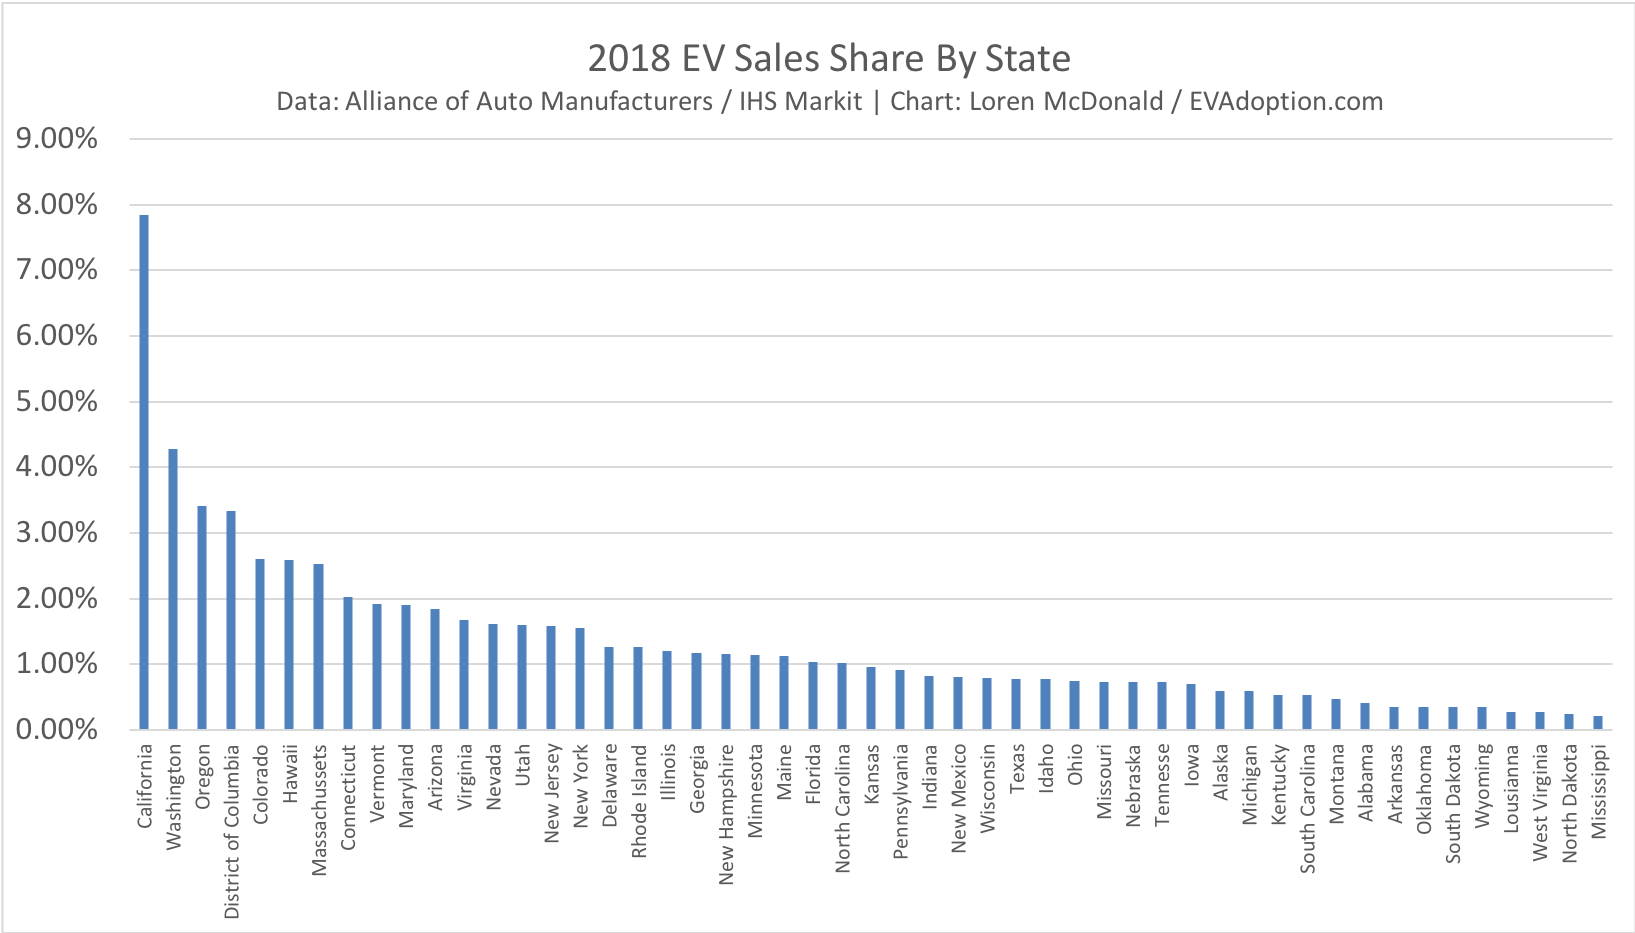 2018 EV Sales Share By State